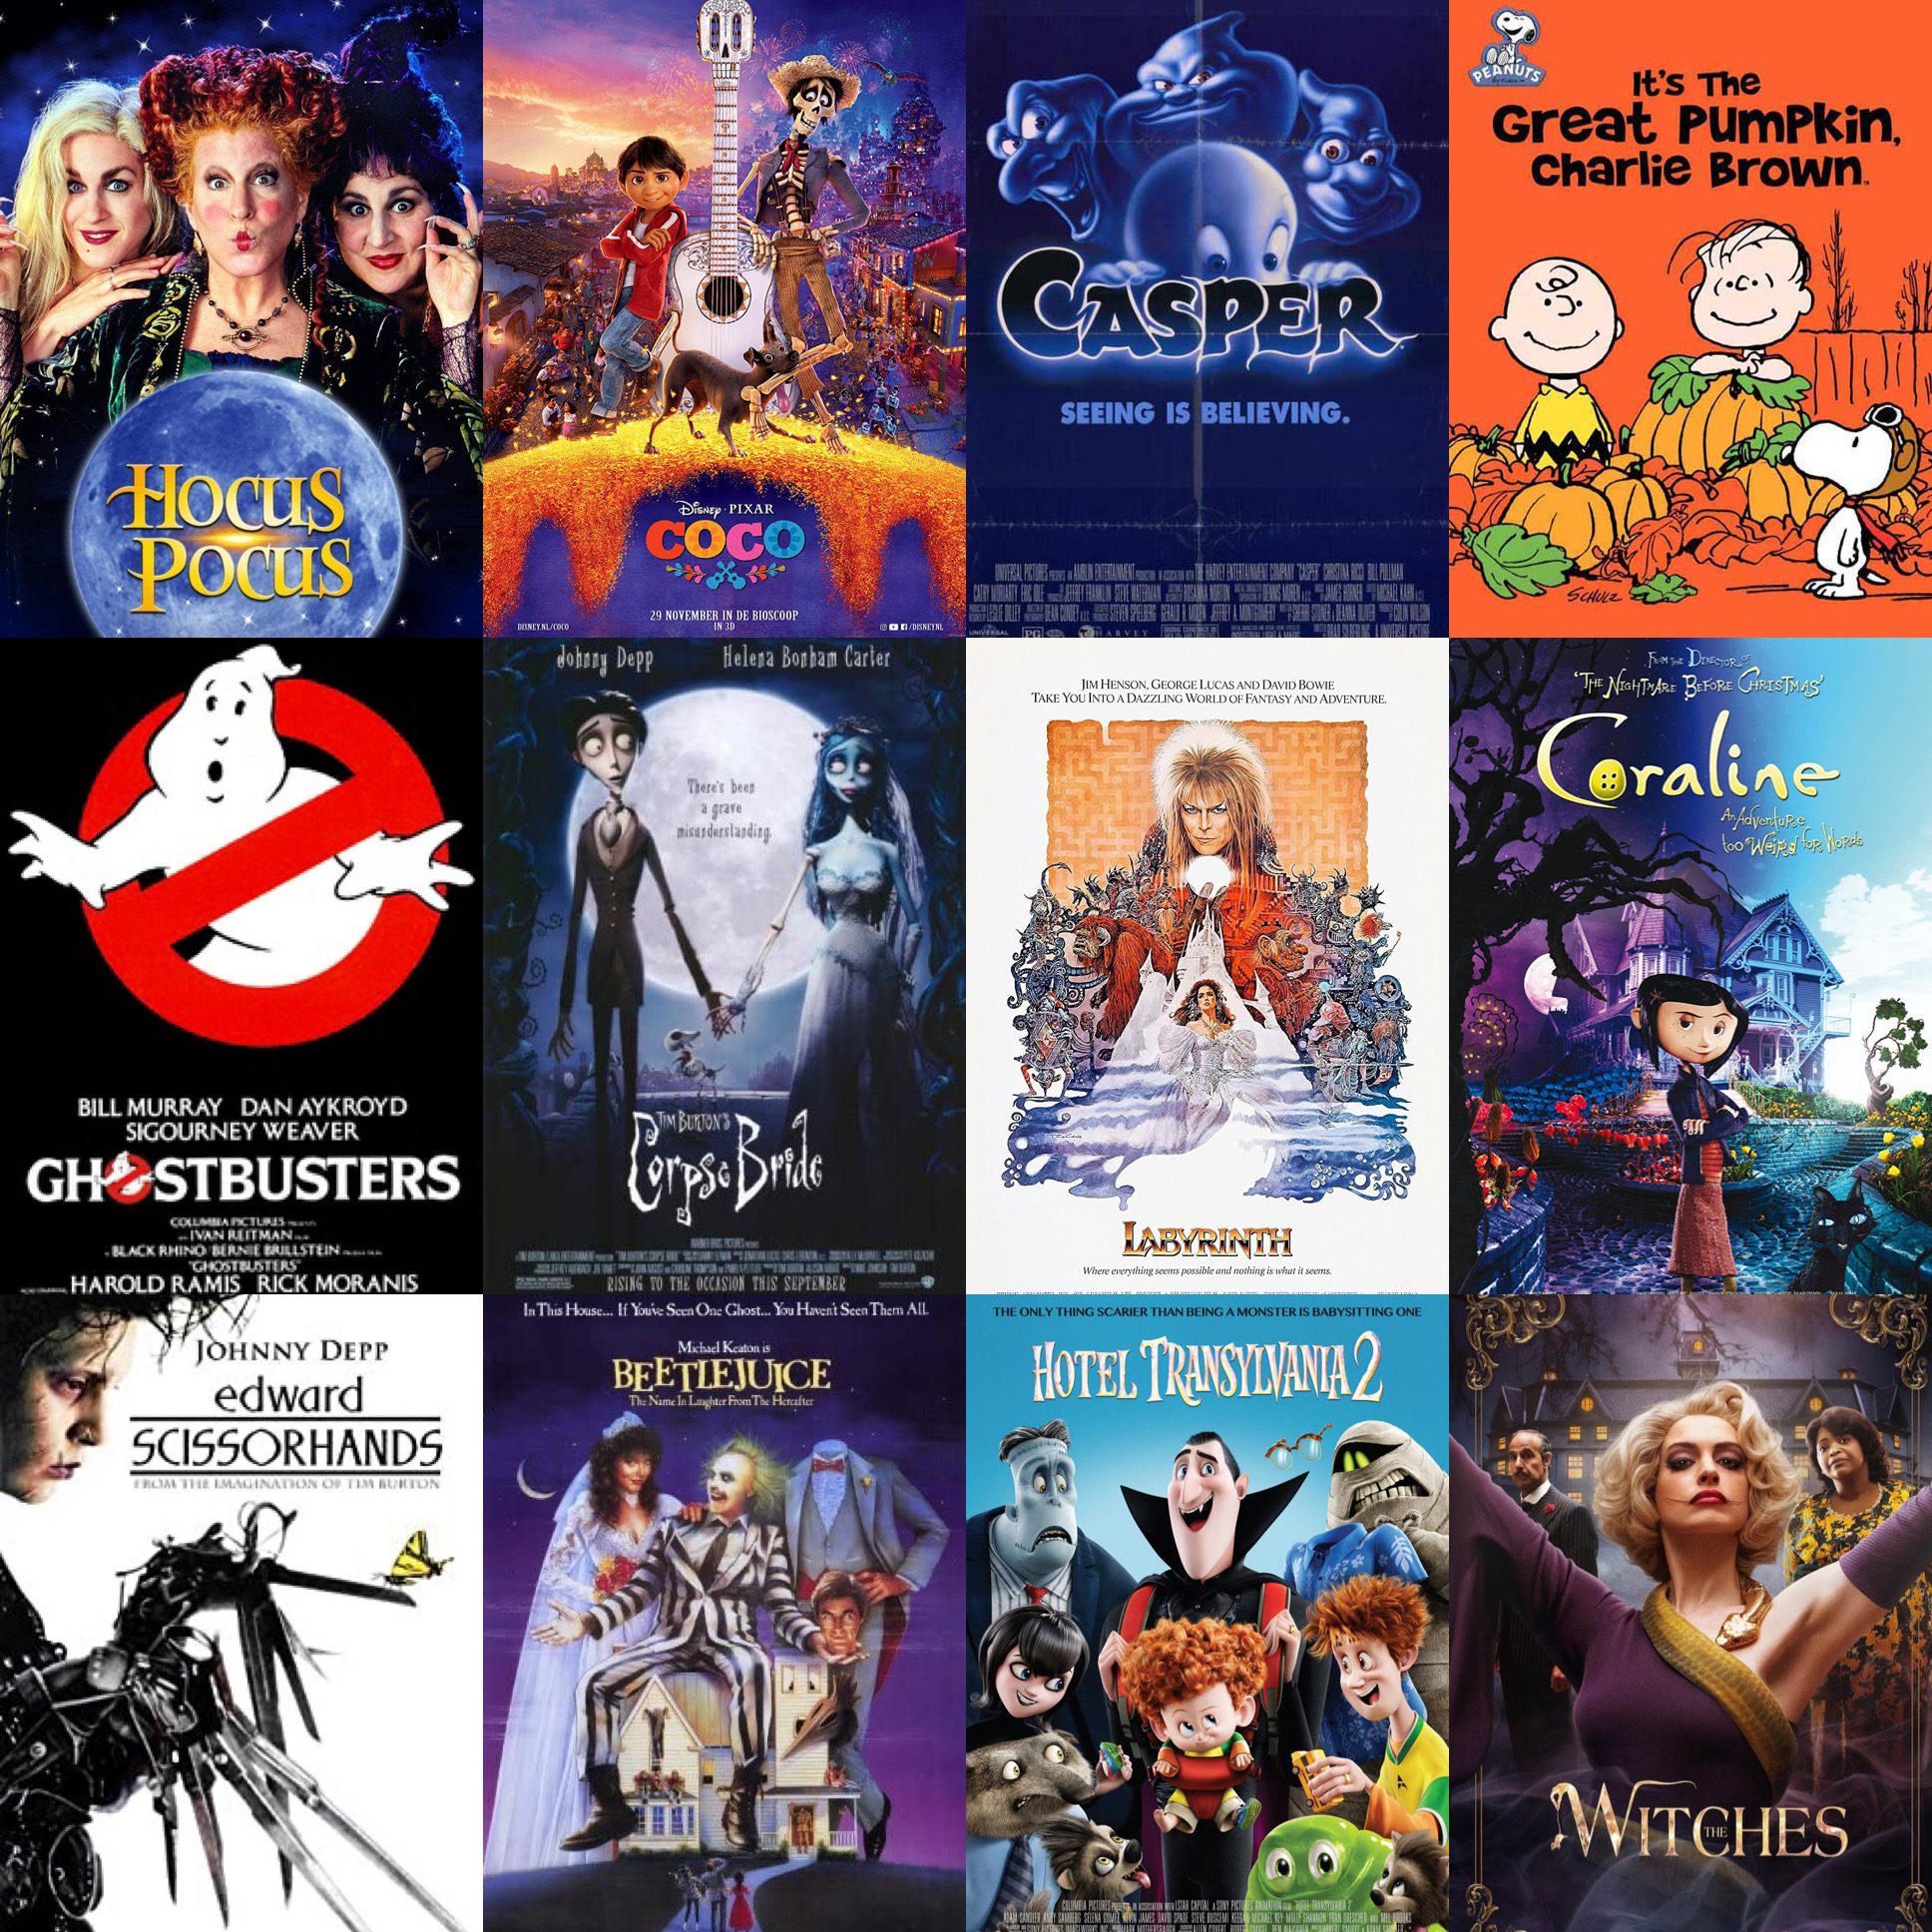 Good Halloween Movies On Netflix For 13 Year Olds / 24 Best Kids Halloween Movies On Netflix Family Halloween Movies On Netflix - The cuter side of scary.